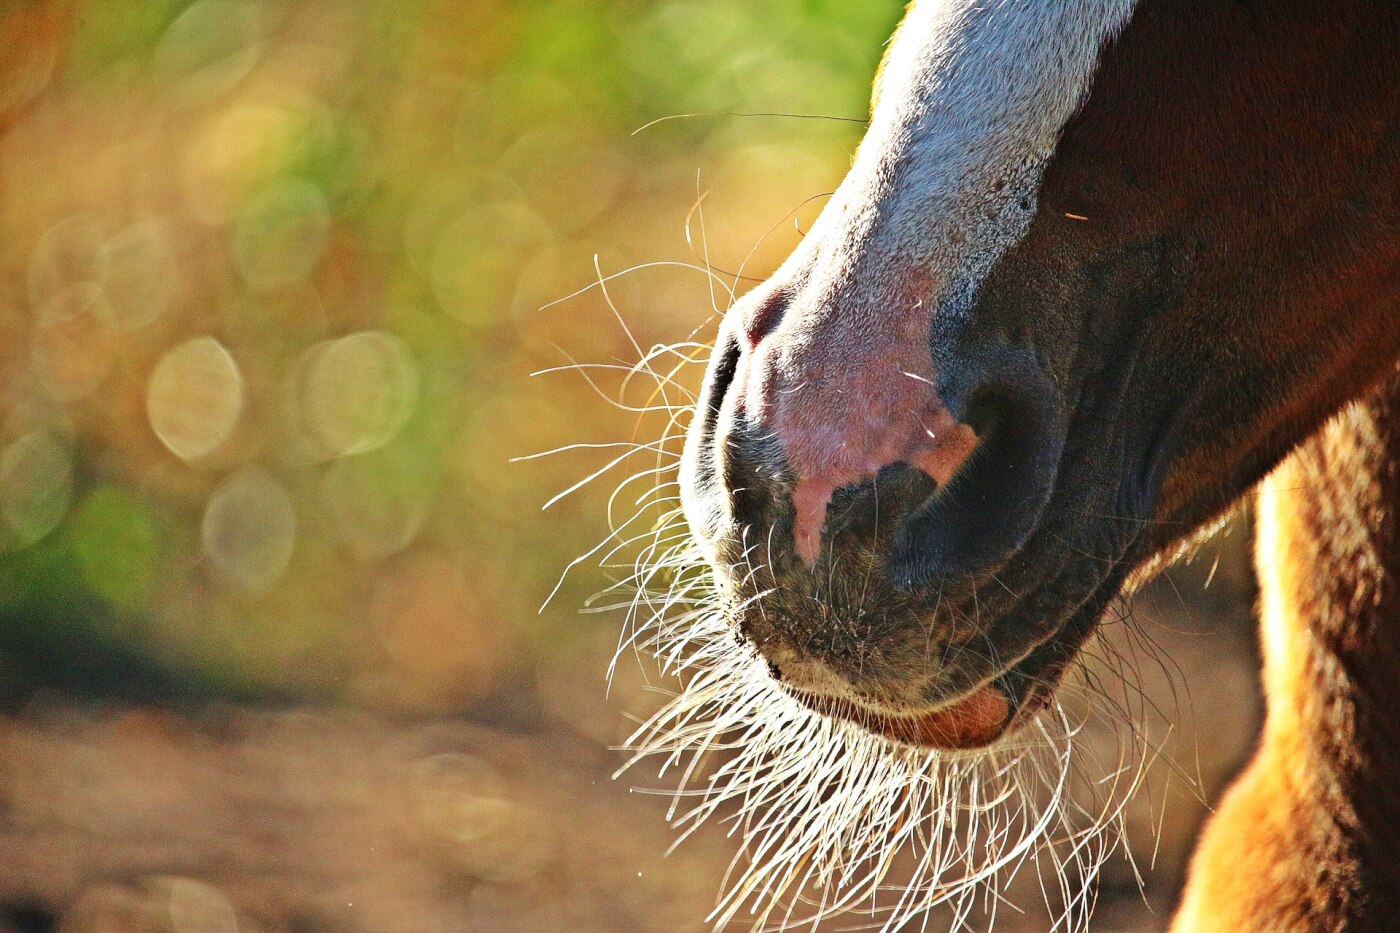 Horse Whiskers Featured Image Why Are Horses' Whiskers Trimmed?